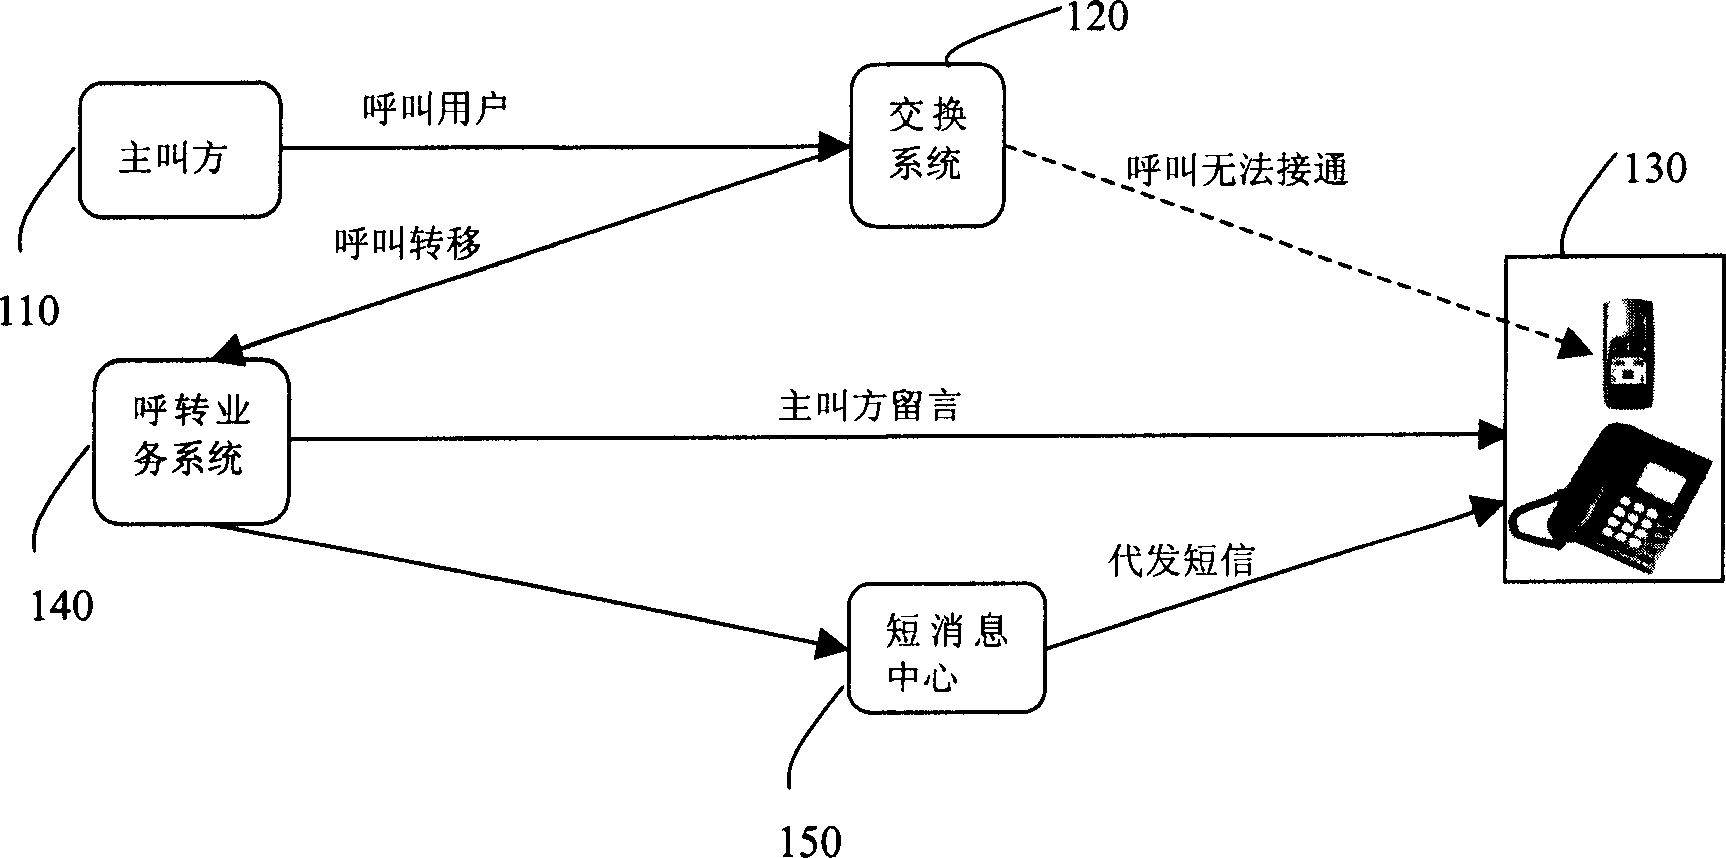 Automatic call transfer method and call transfer service system